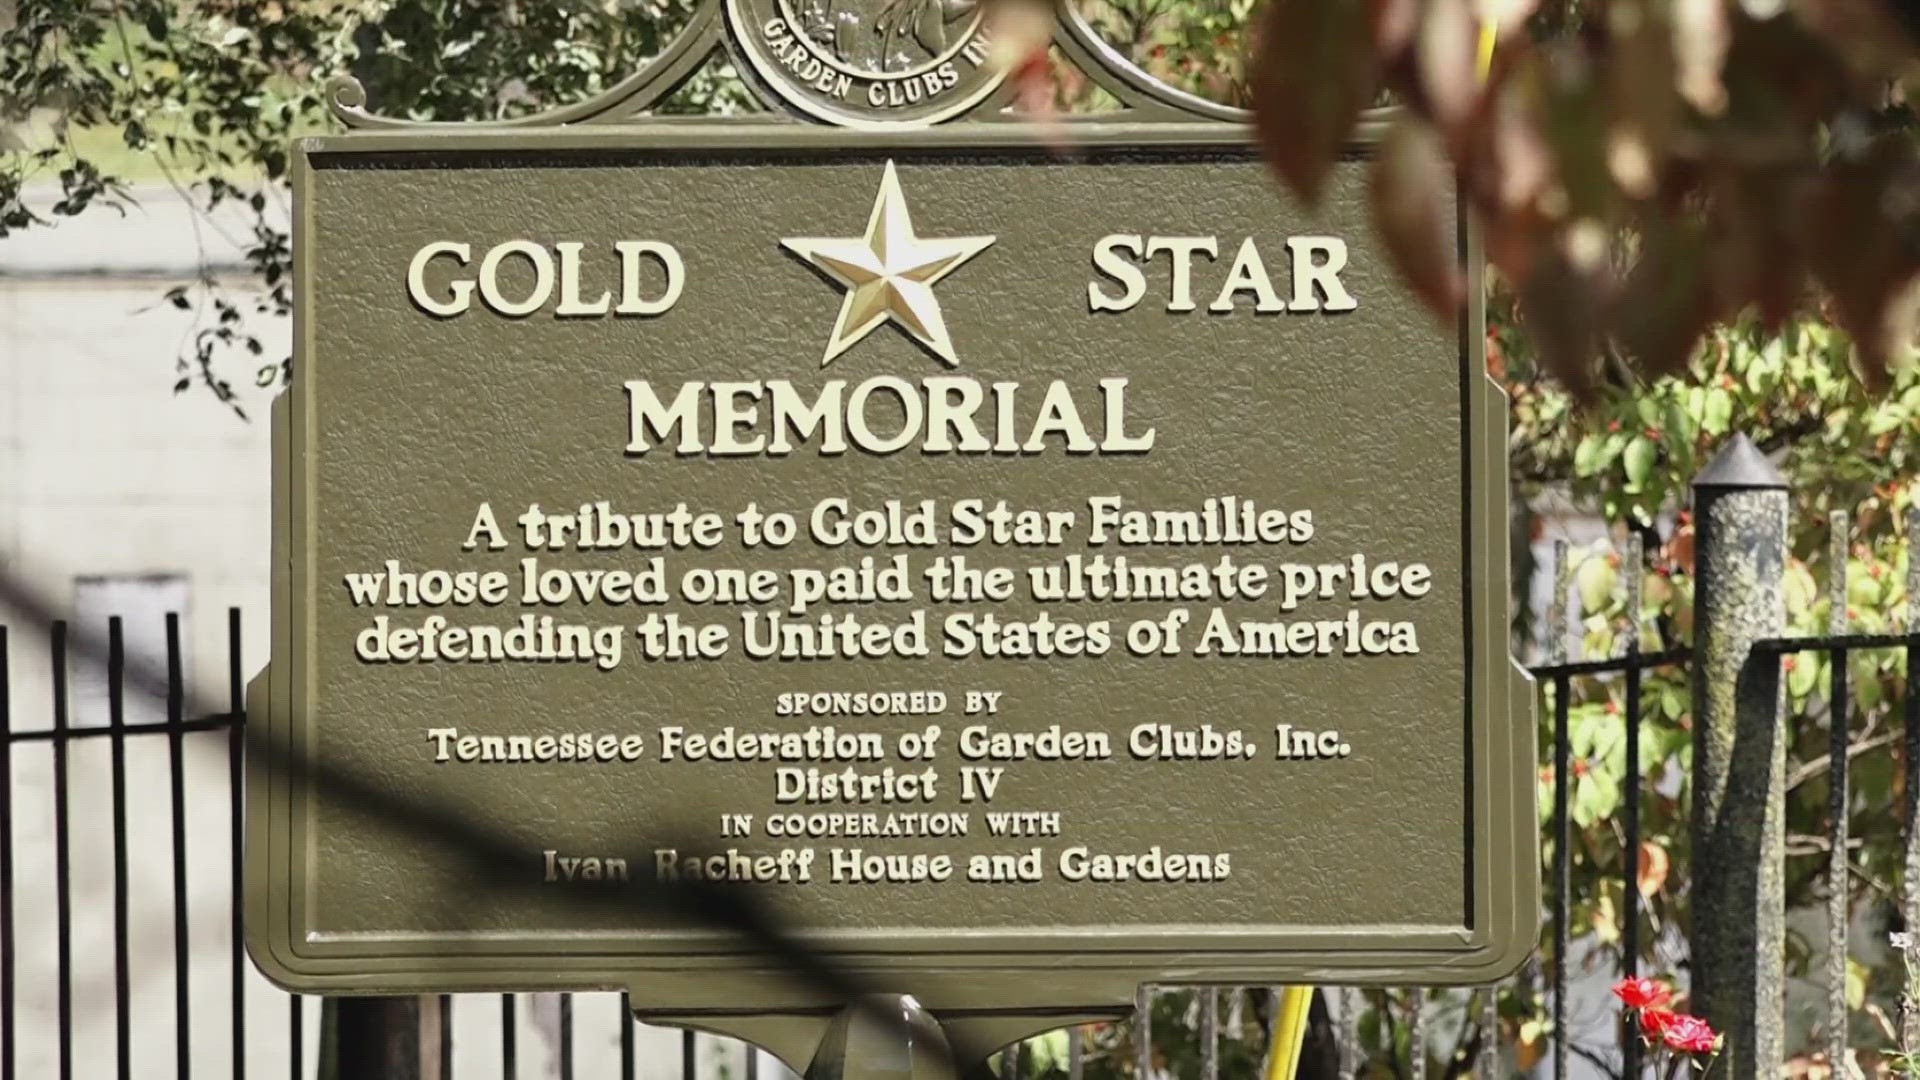 The Tennessee Federation of Garden Clubs honored those family members with a Gold Star Memorial marker at Racheff Park and Garden.